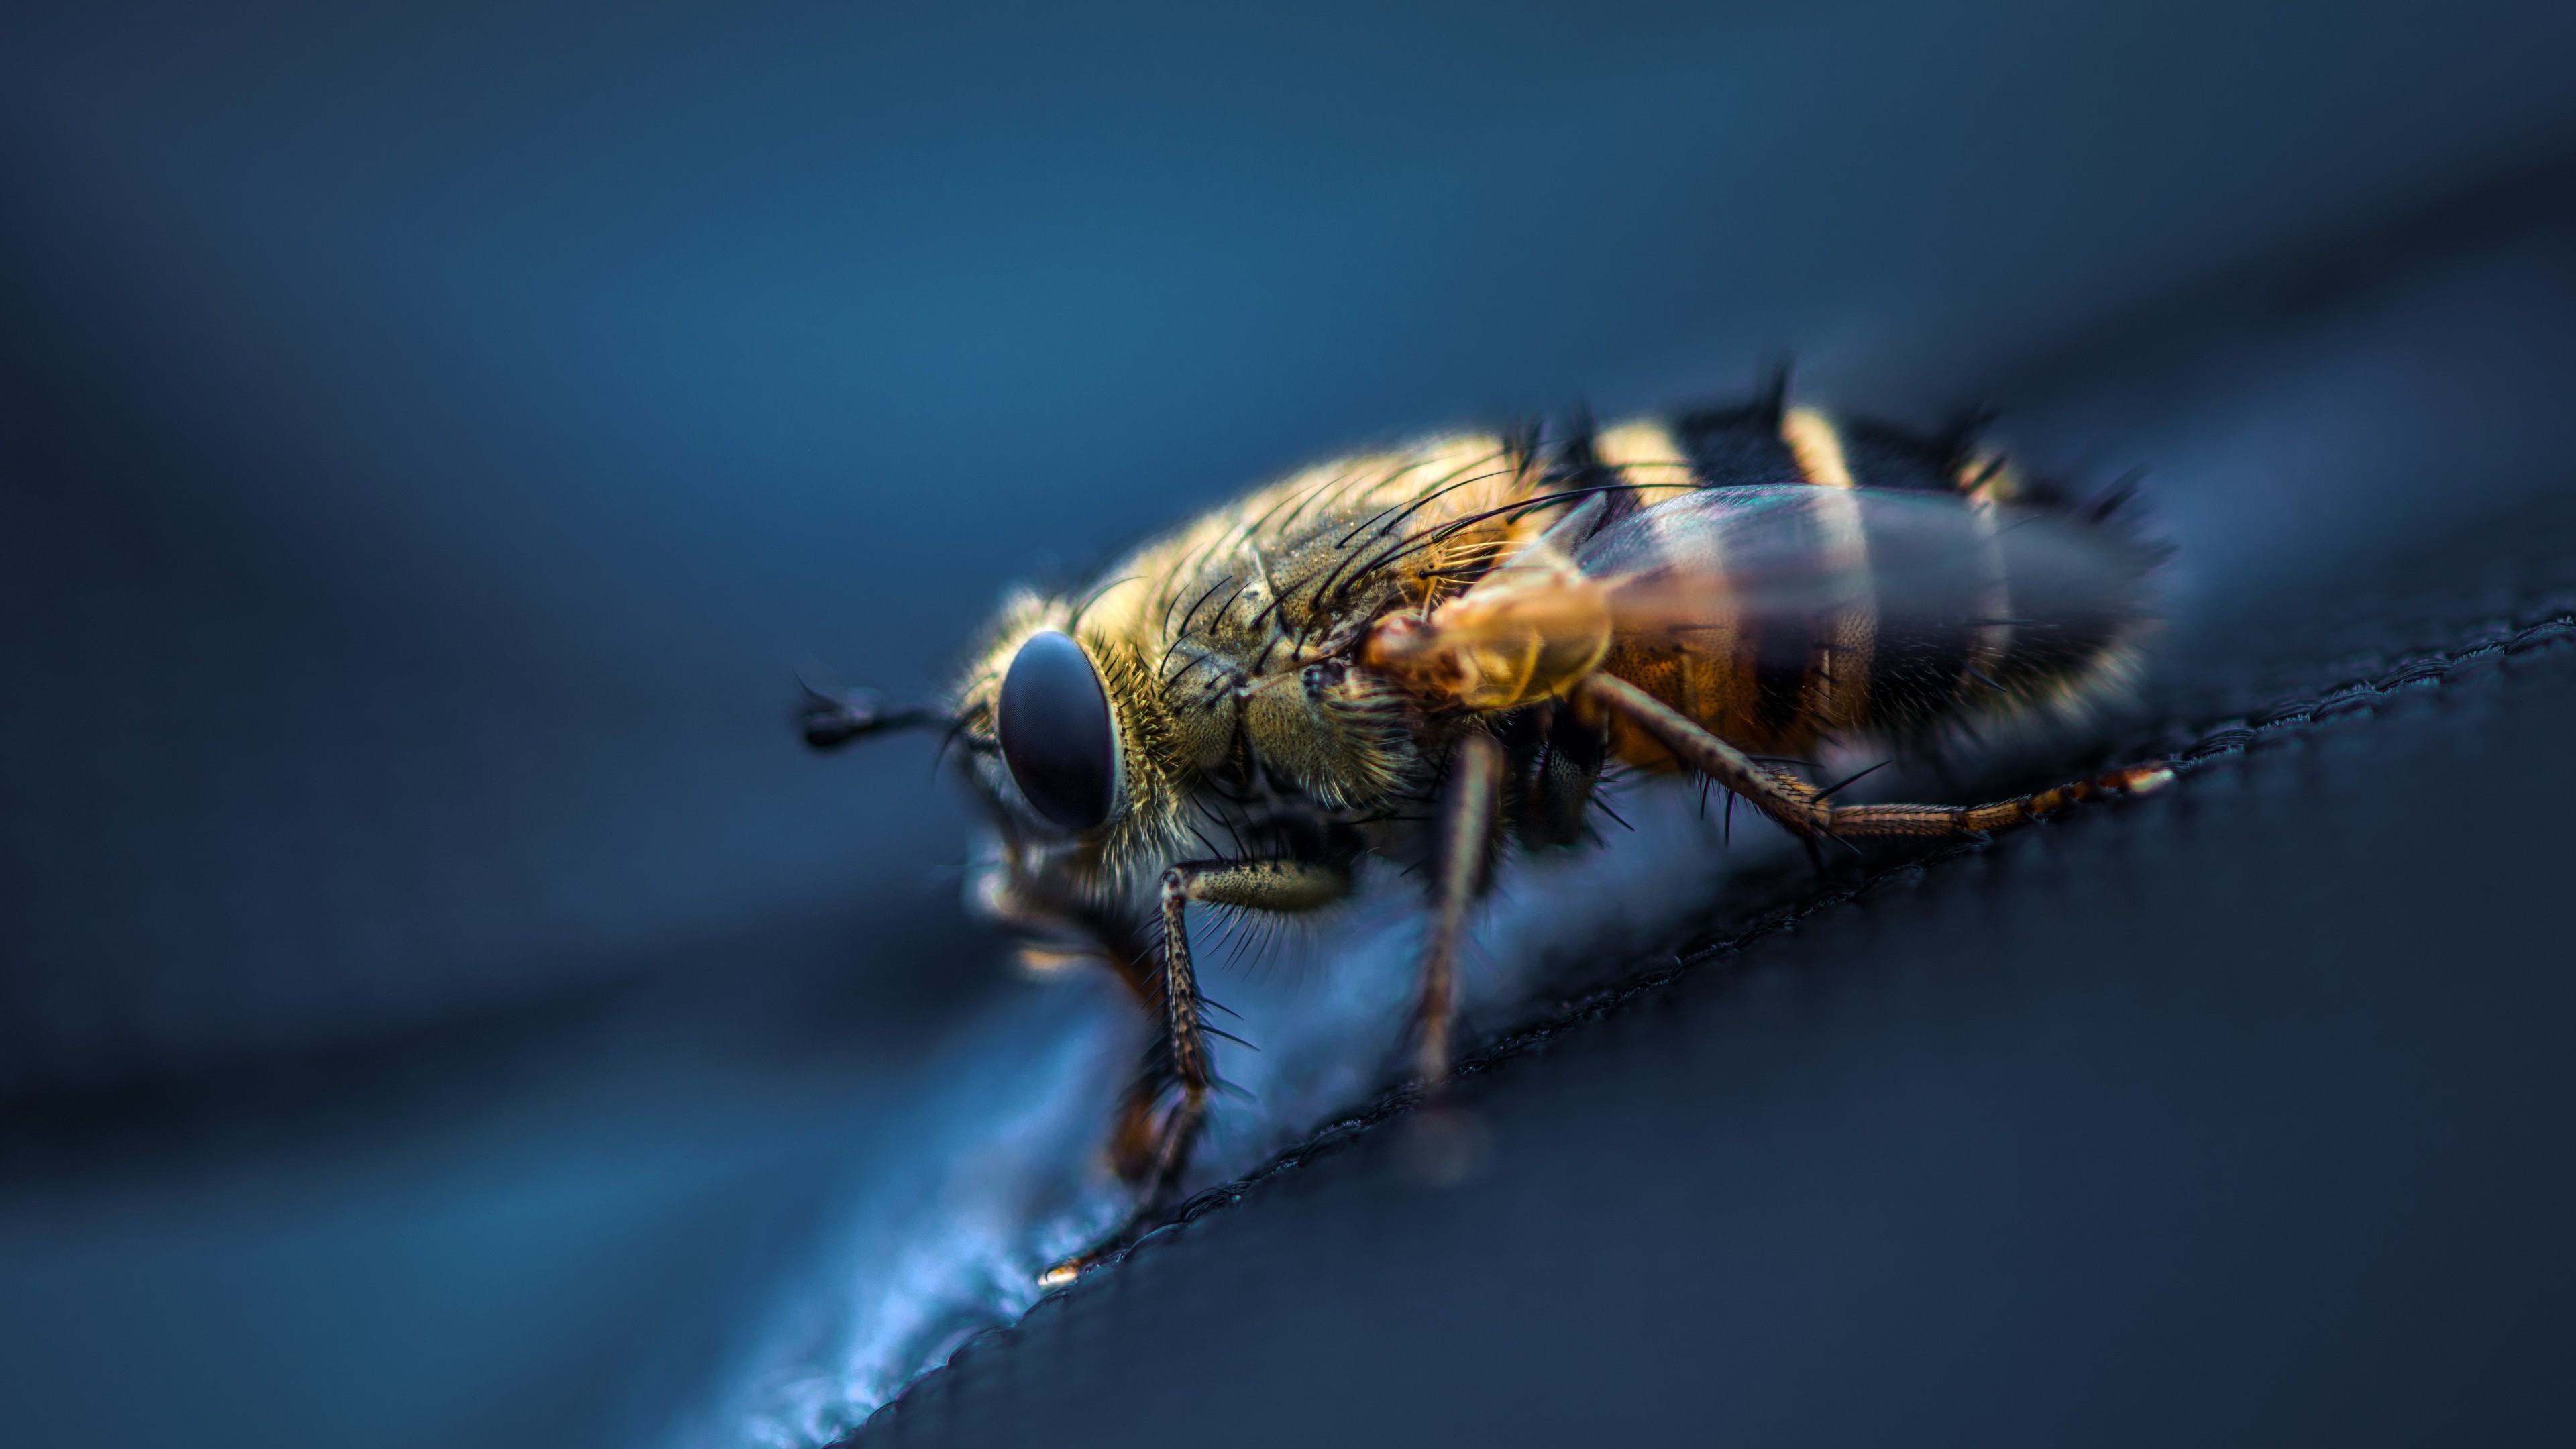 Fly Macro Wallpaper Insects Desktop Background